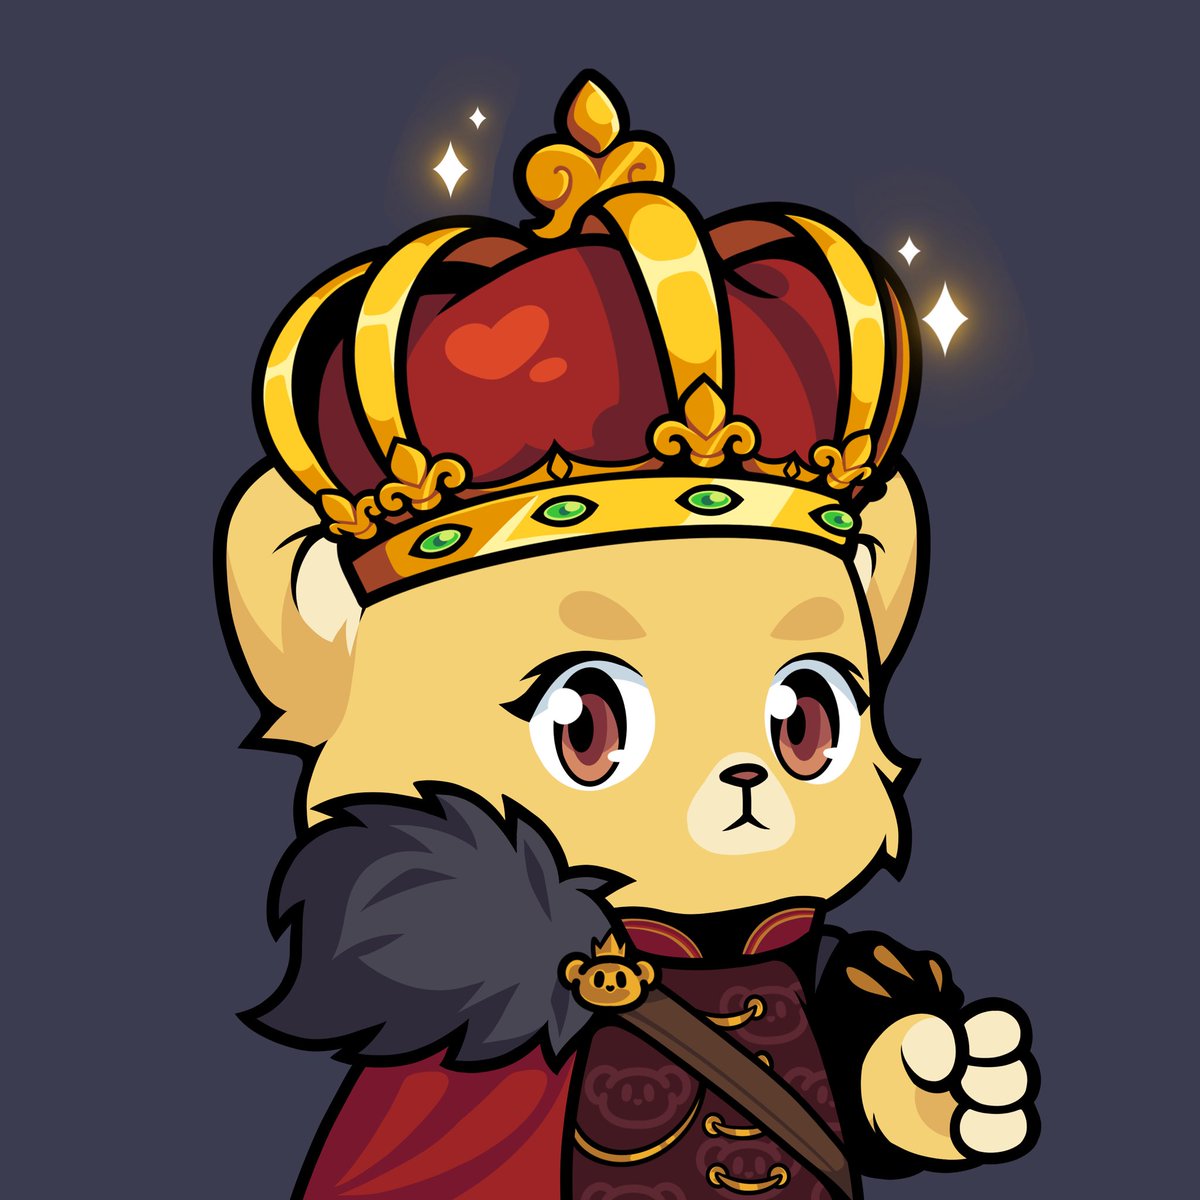 To become a king you first need to have an army and that army must unite and try to be like you.
Let's make YPGZ an empire where unity is the highest, where the best of everything. @Yogapetz 💓 @kubzjungle 

Join discord and support together 
discord.gg/WeXKw7ZP
#kubz 
#YGPZ